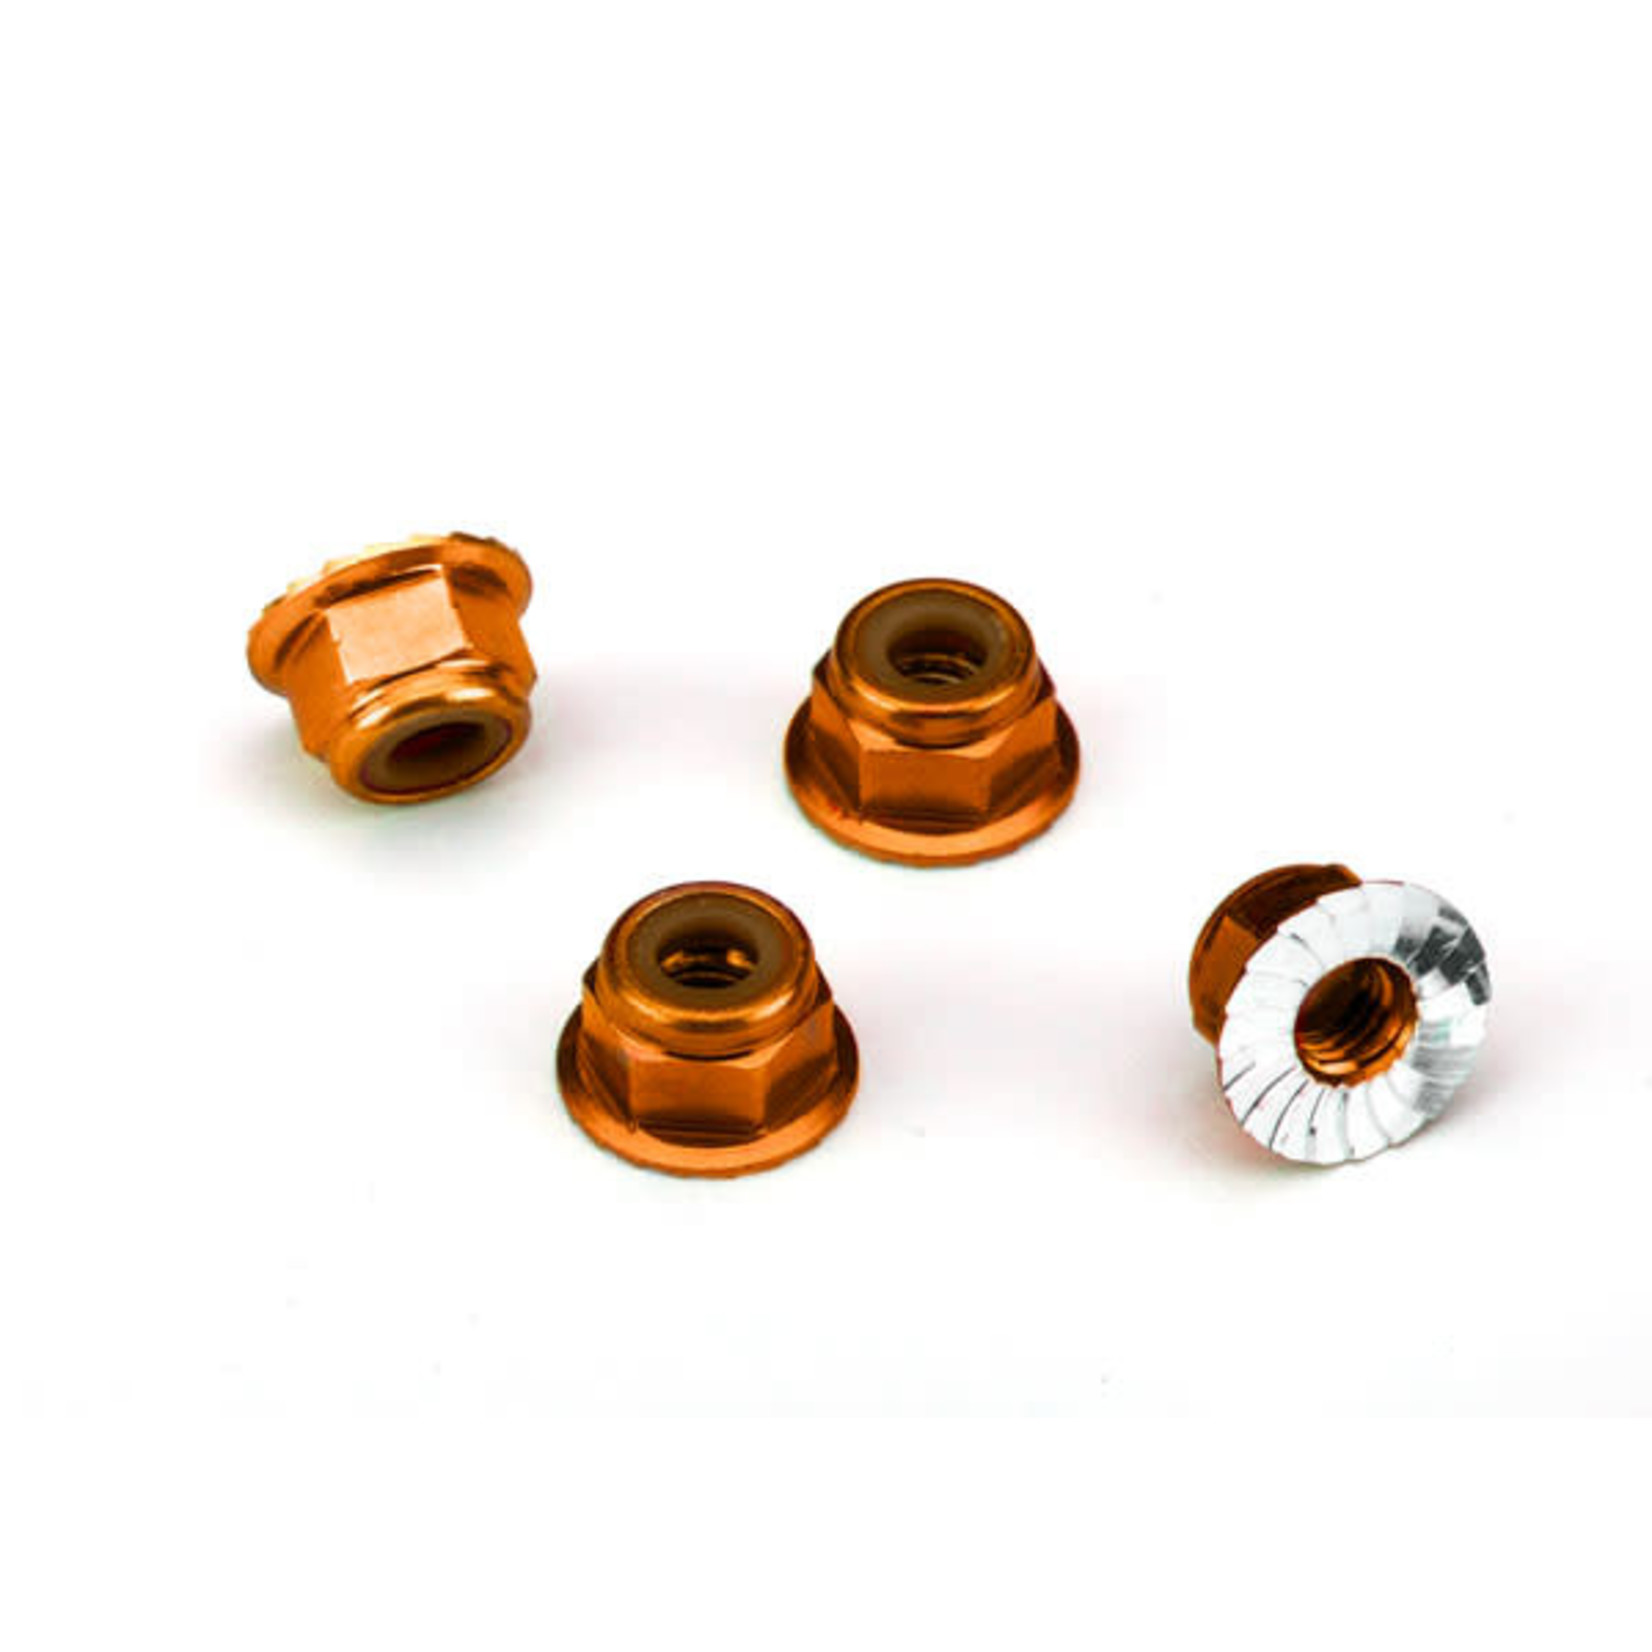 Traxxas Traxxas 4mm Aluminum Flanged Serrated Nuts (Orange) (4) #1747T